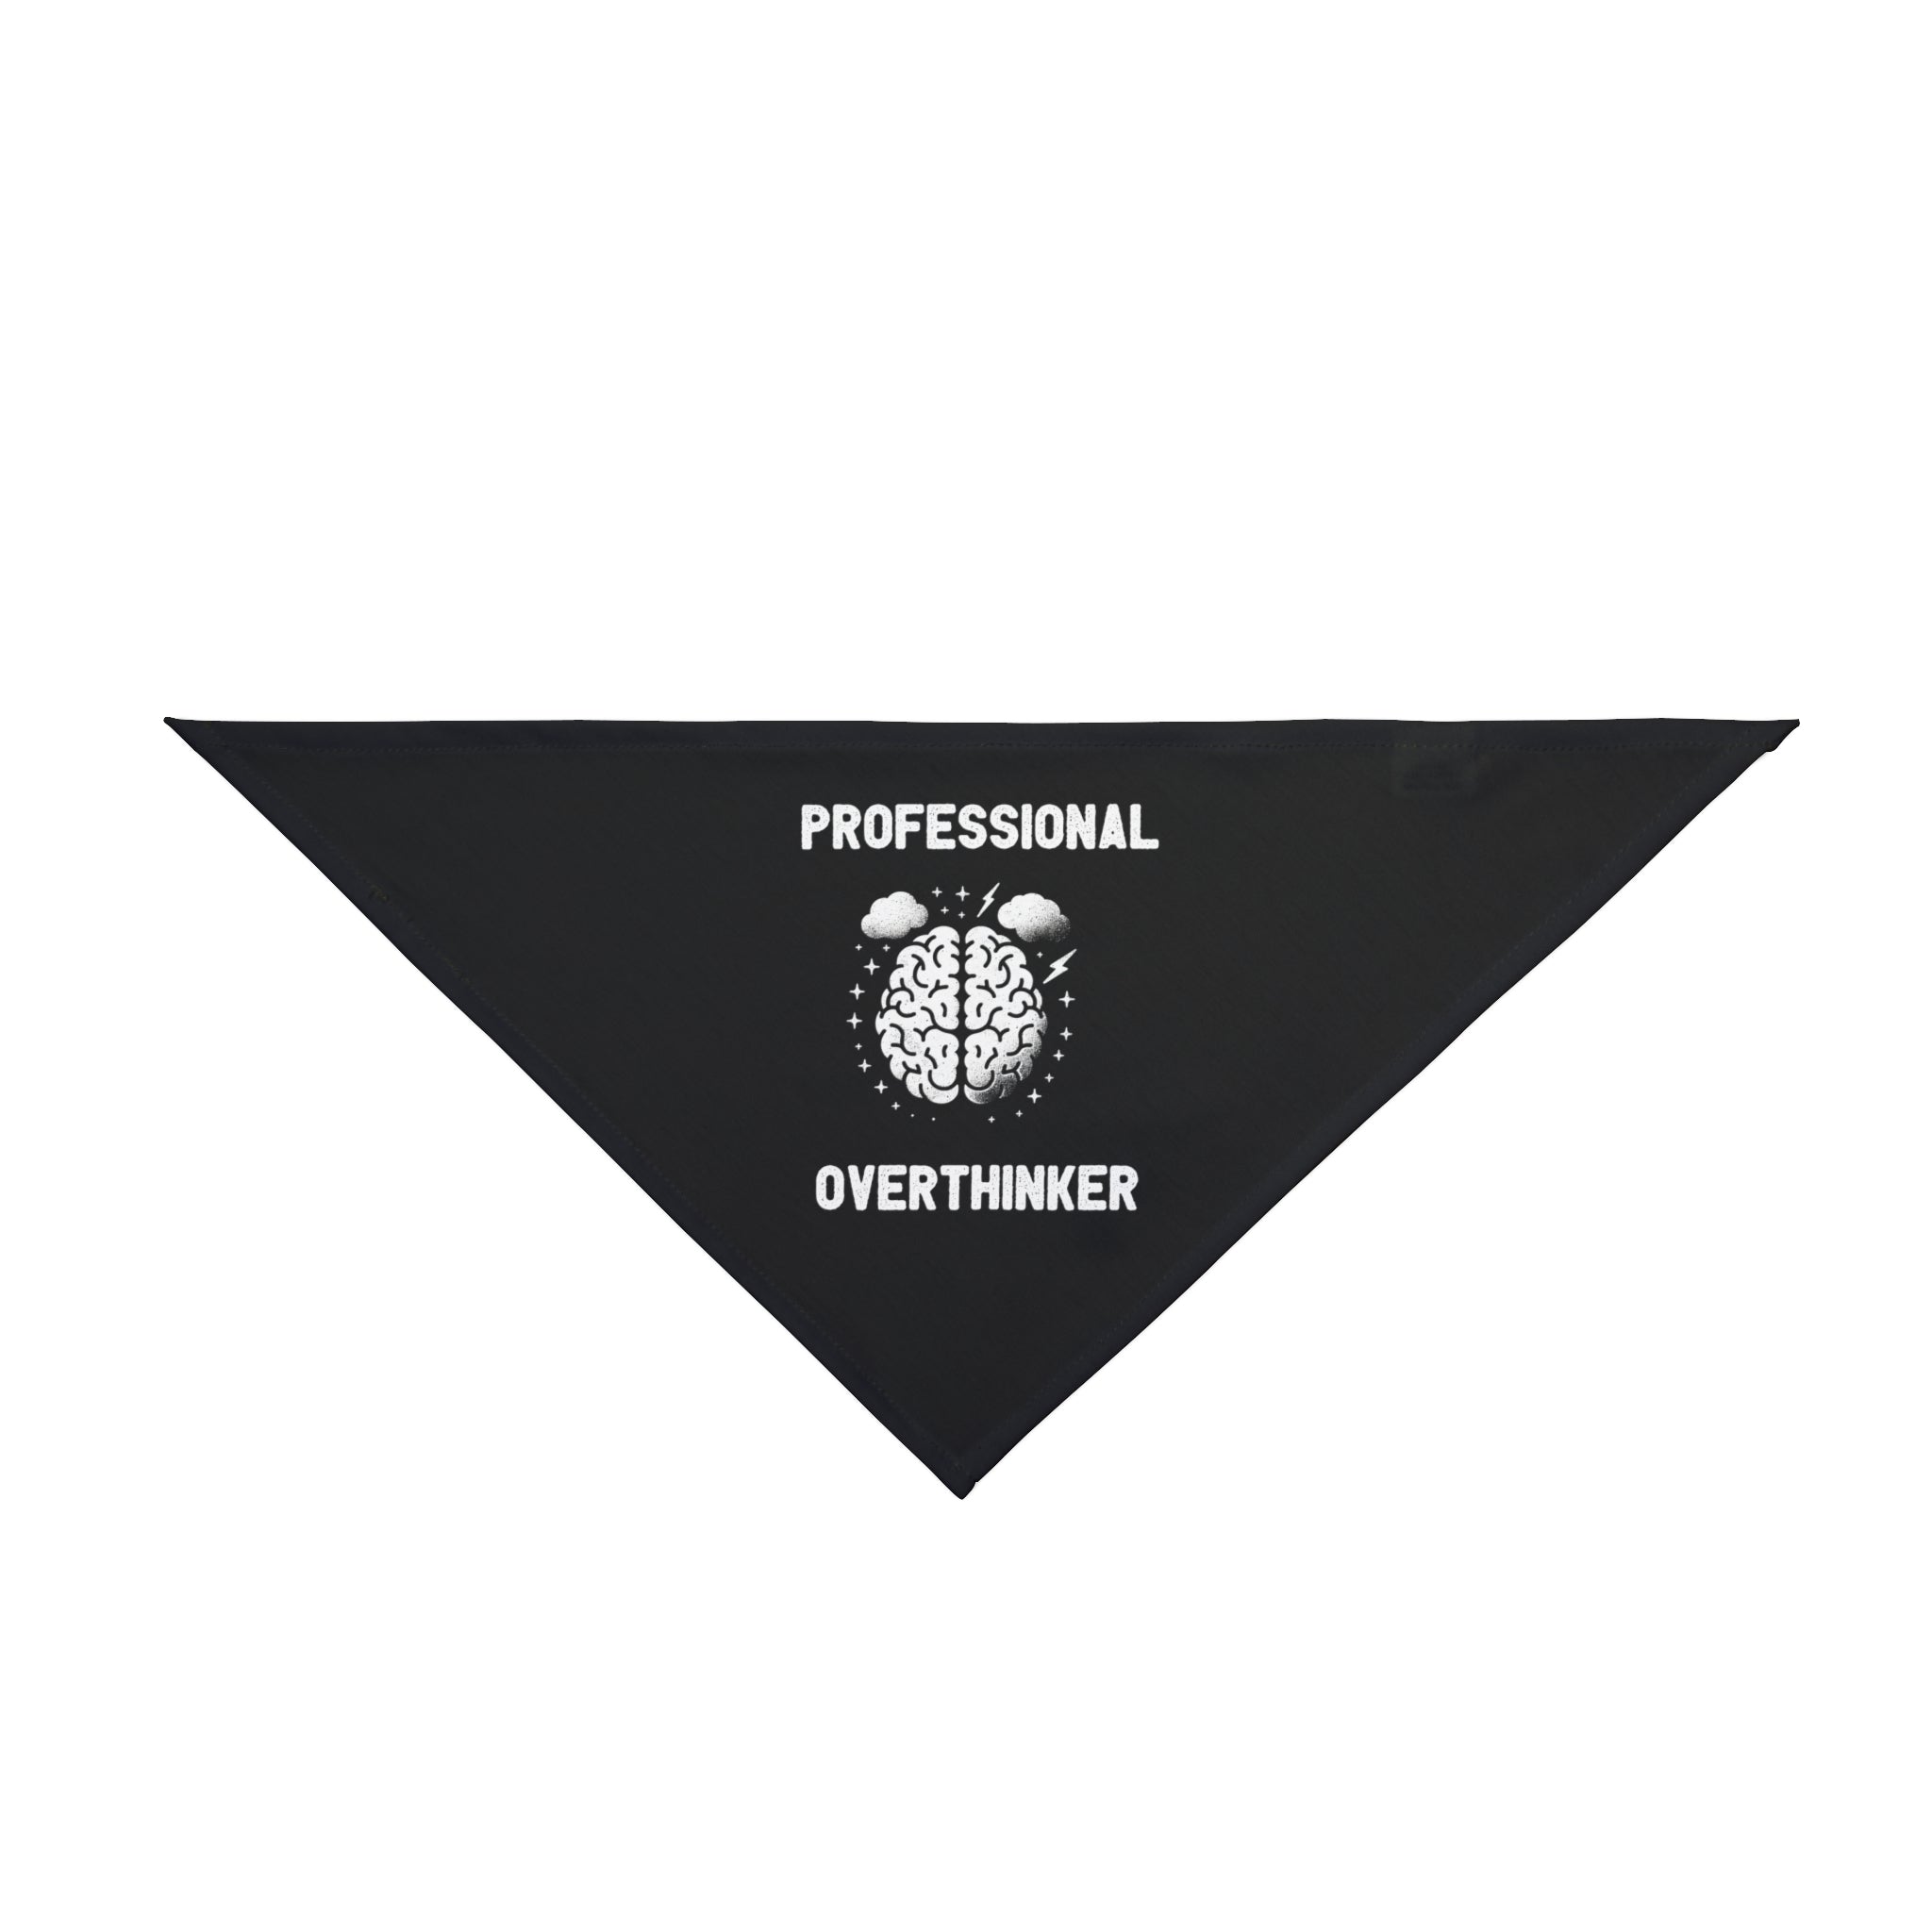 A black triangular polyester pet bandana, **Professional Overthinker - Pet Bandana**, features a graphic of a brain and text that reads "PROFESSIONAL OVERTHINKER." Perfect for your pet's skin, it's both stylish and comfortable.